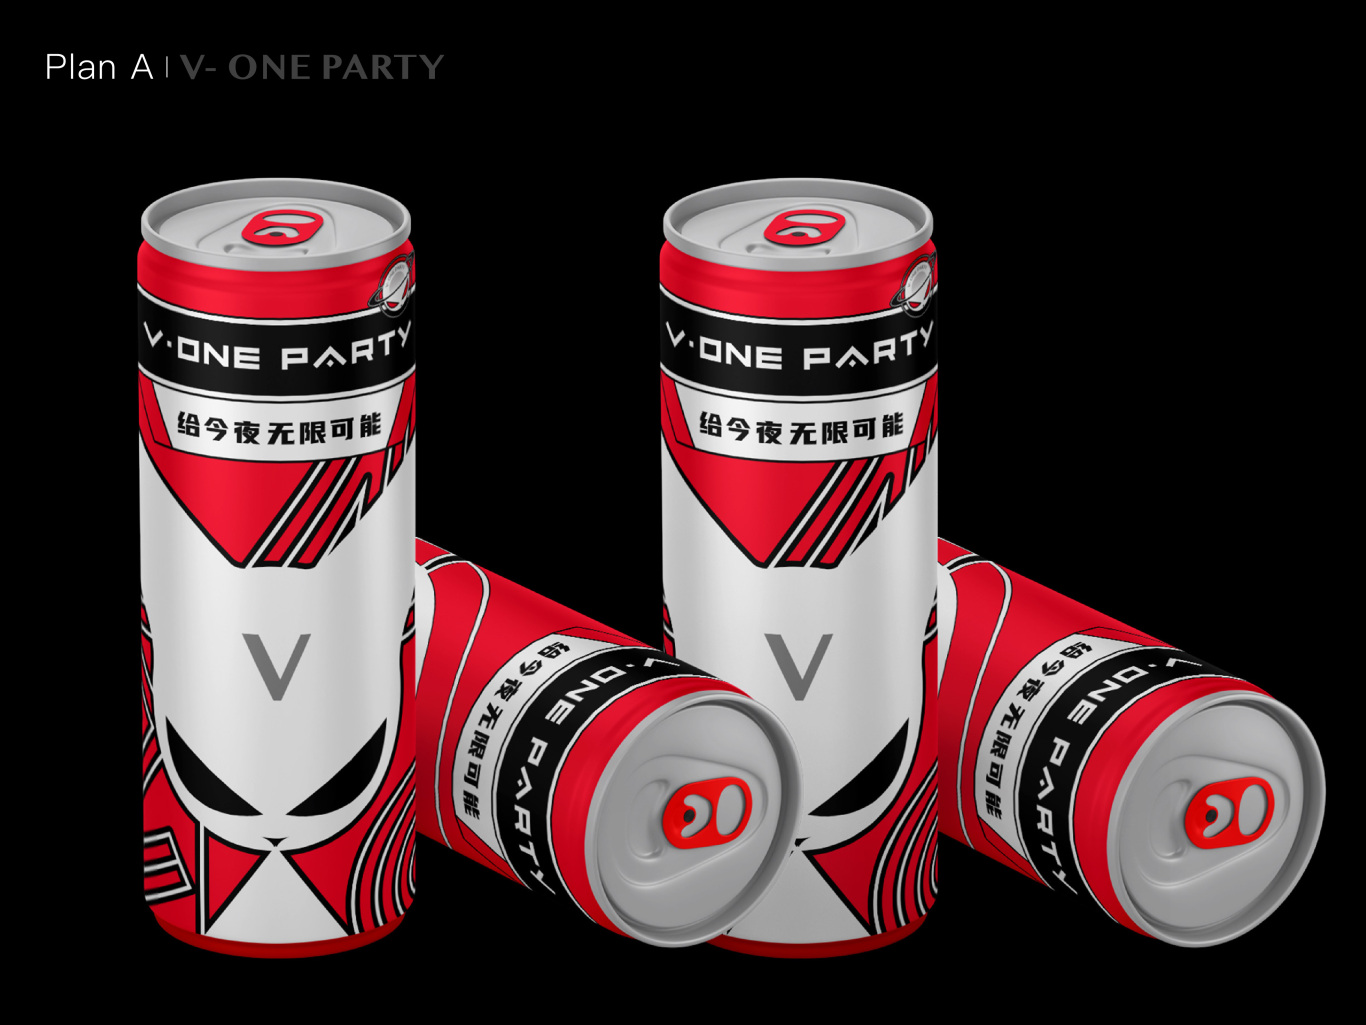 V-ONE PARTY夜店品牌图5